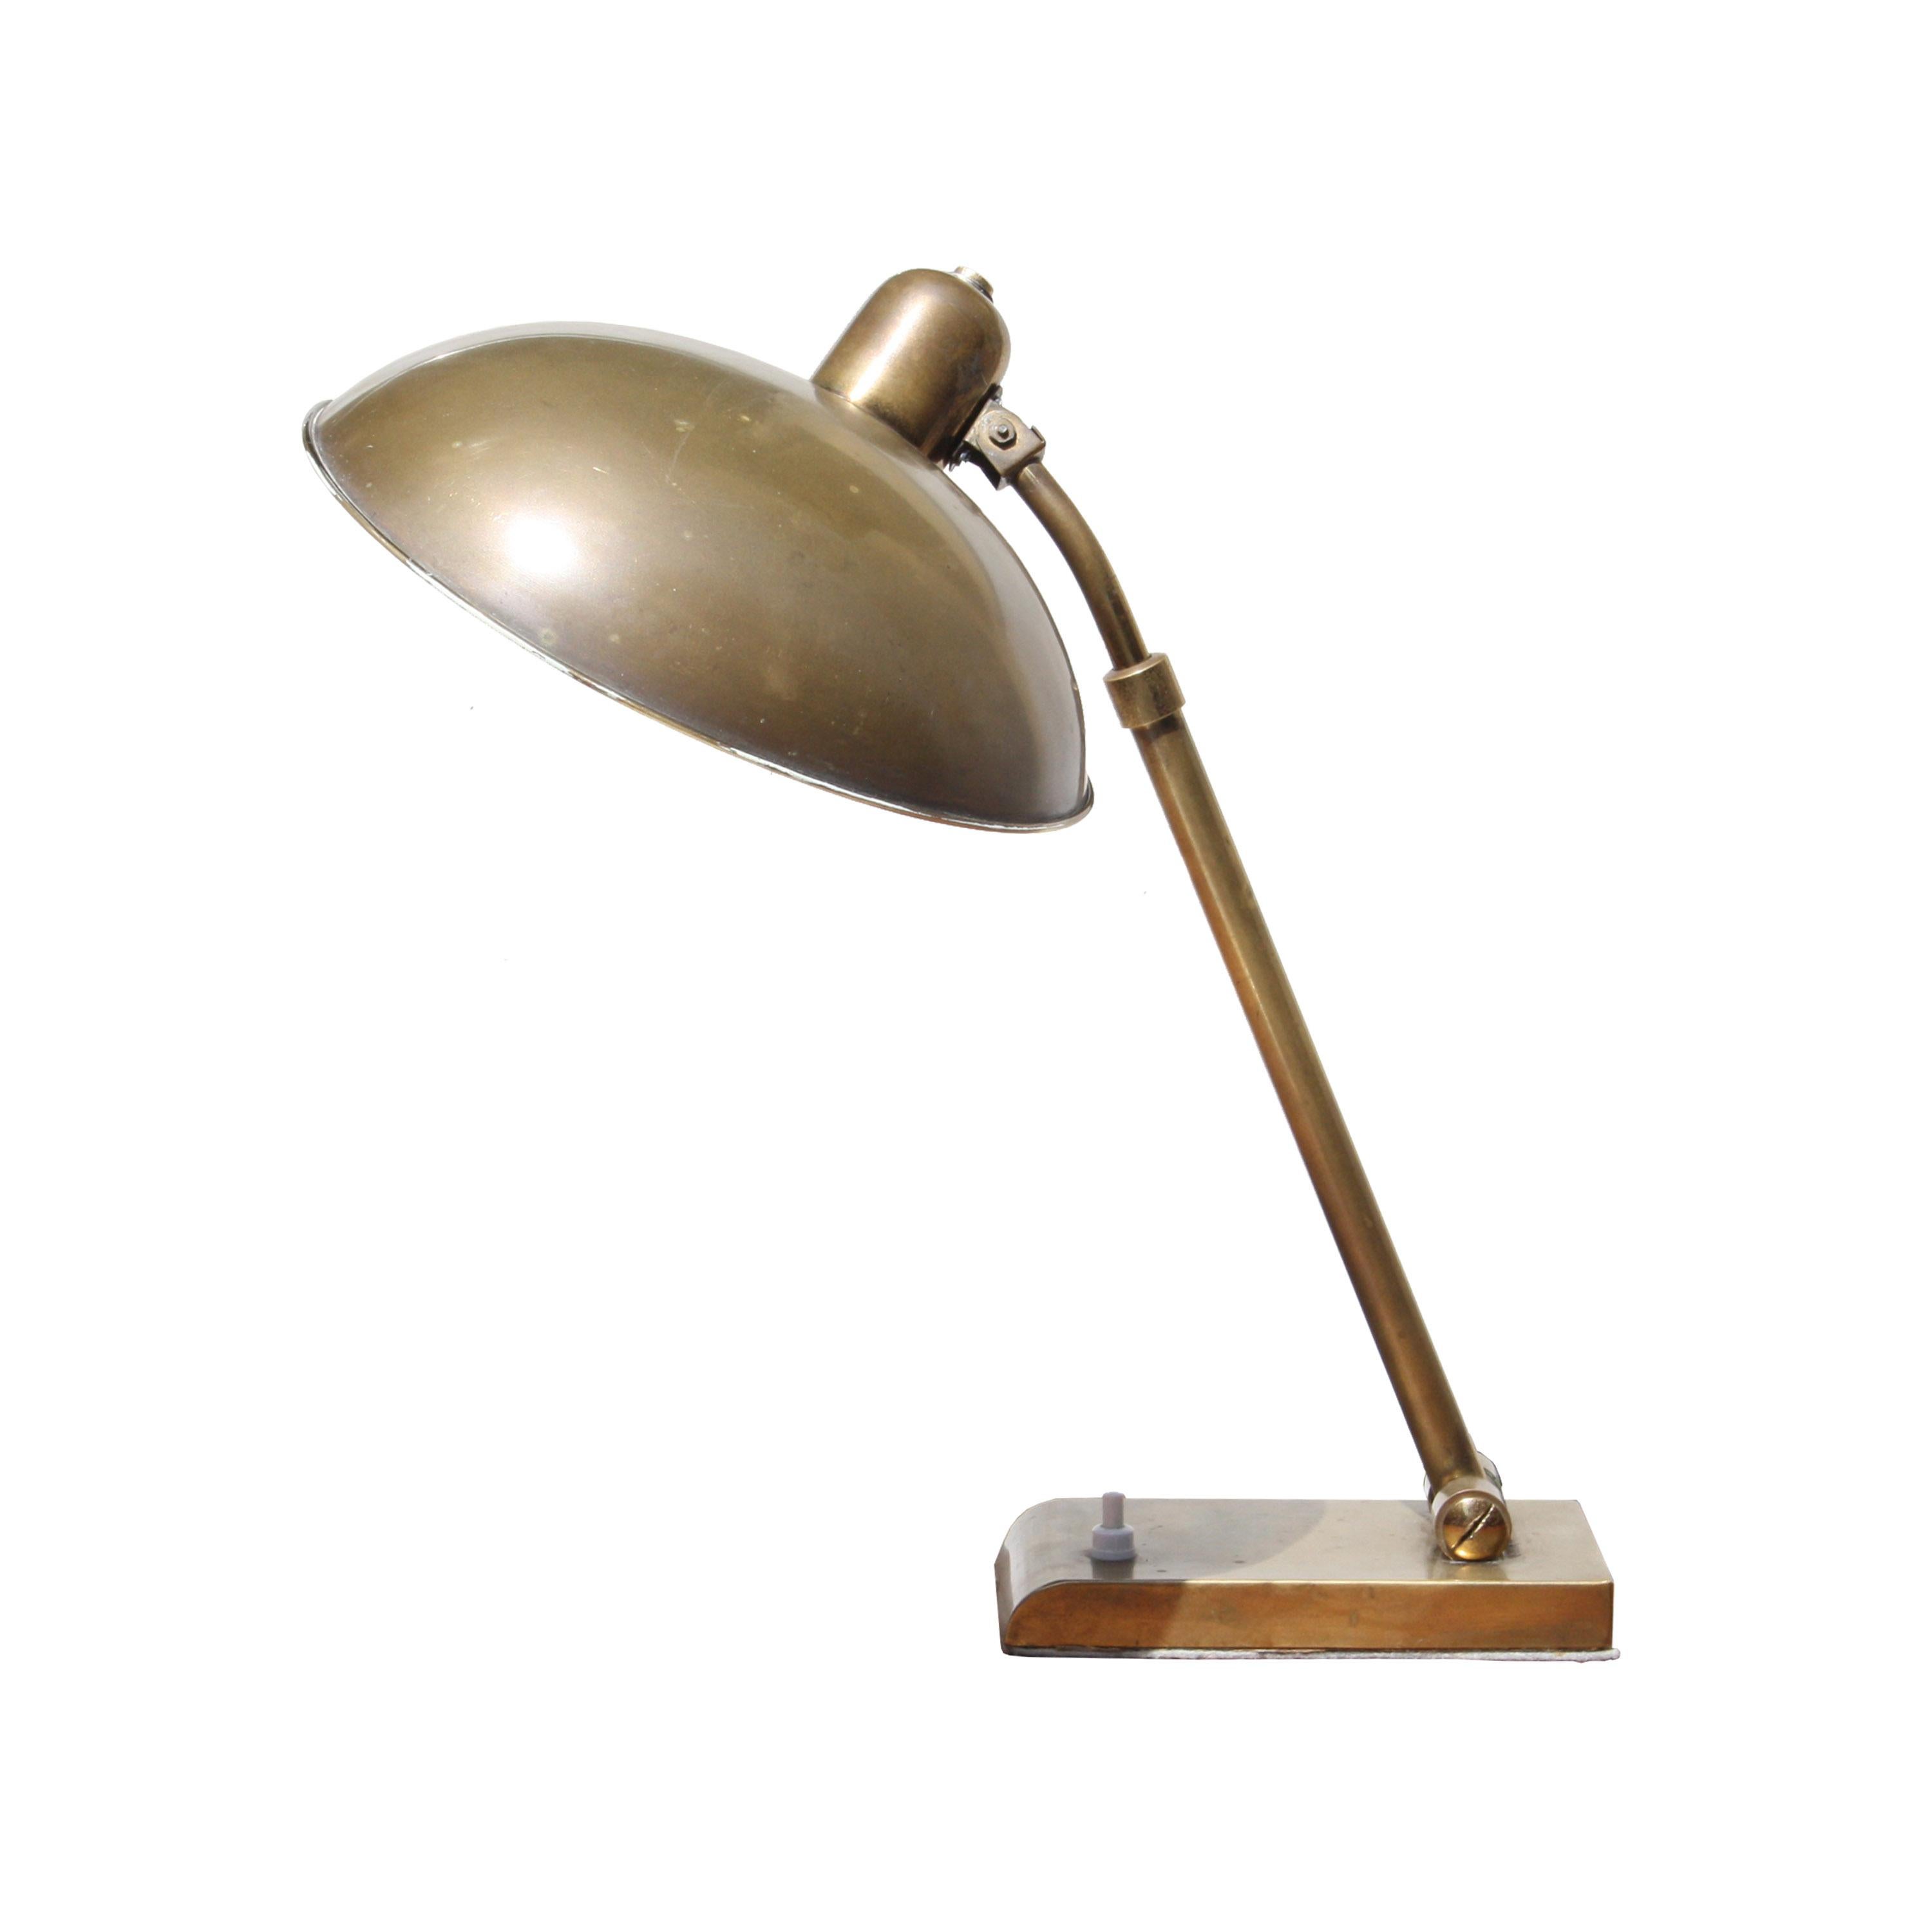 Desk lamp with structure and base in brass. Height and direction adjustable. 545.